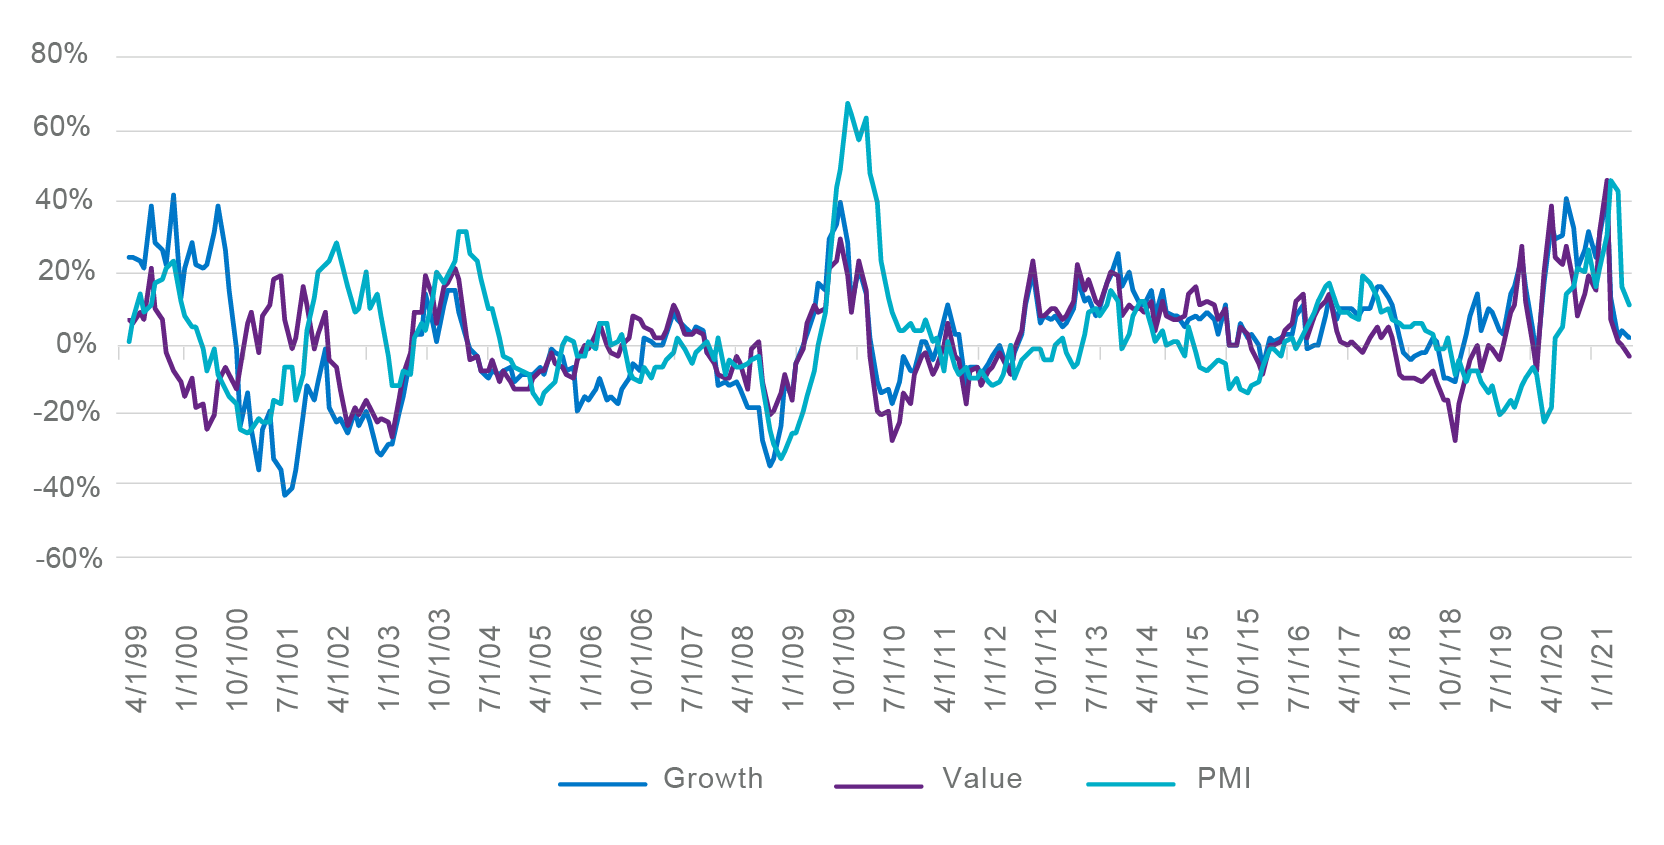 Chart showing price to Earnings of Growth & Value vs PMI from April 1999 to January 2021